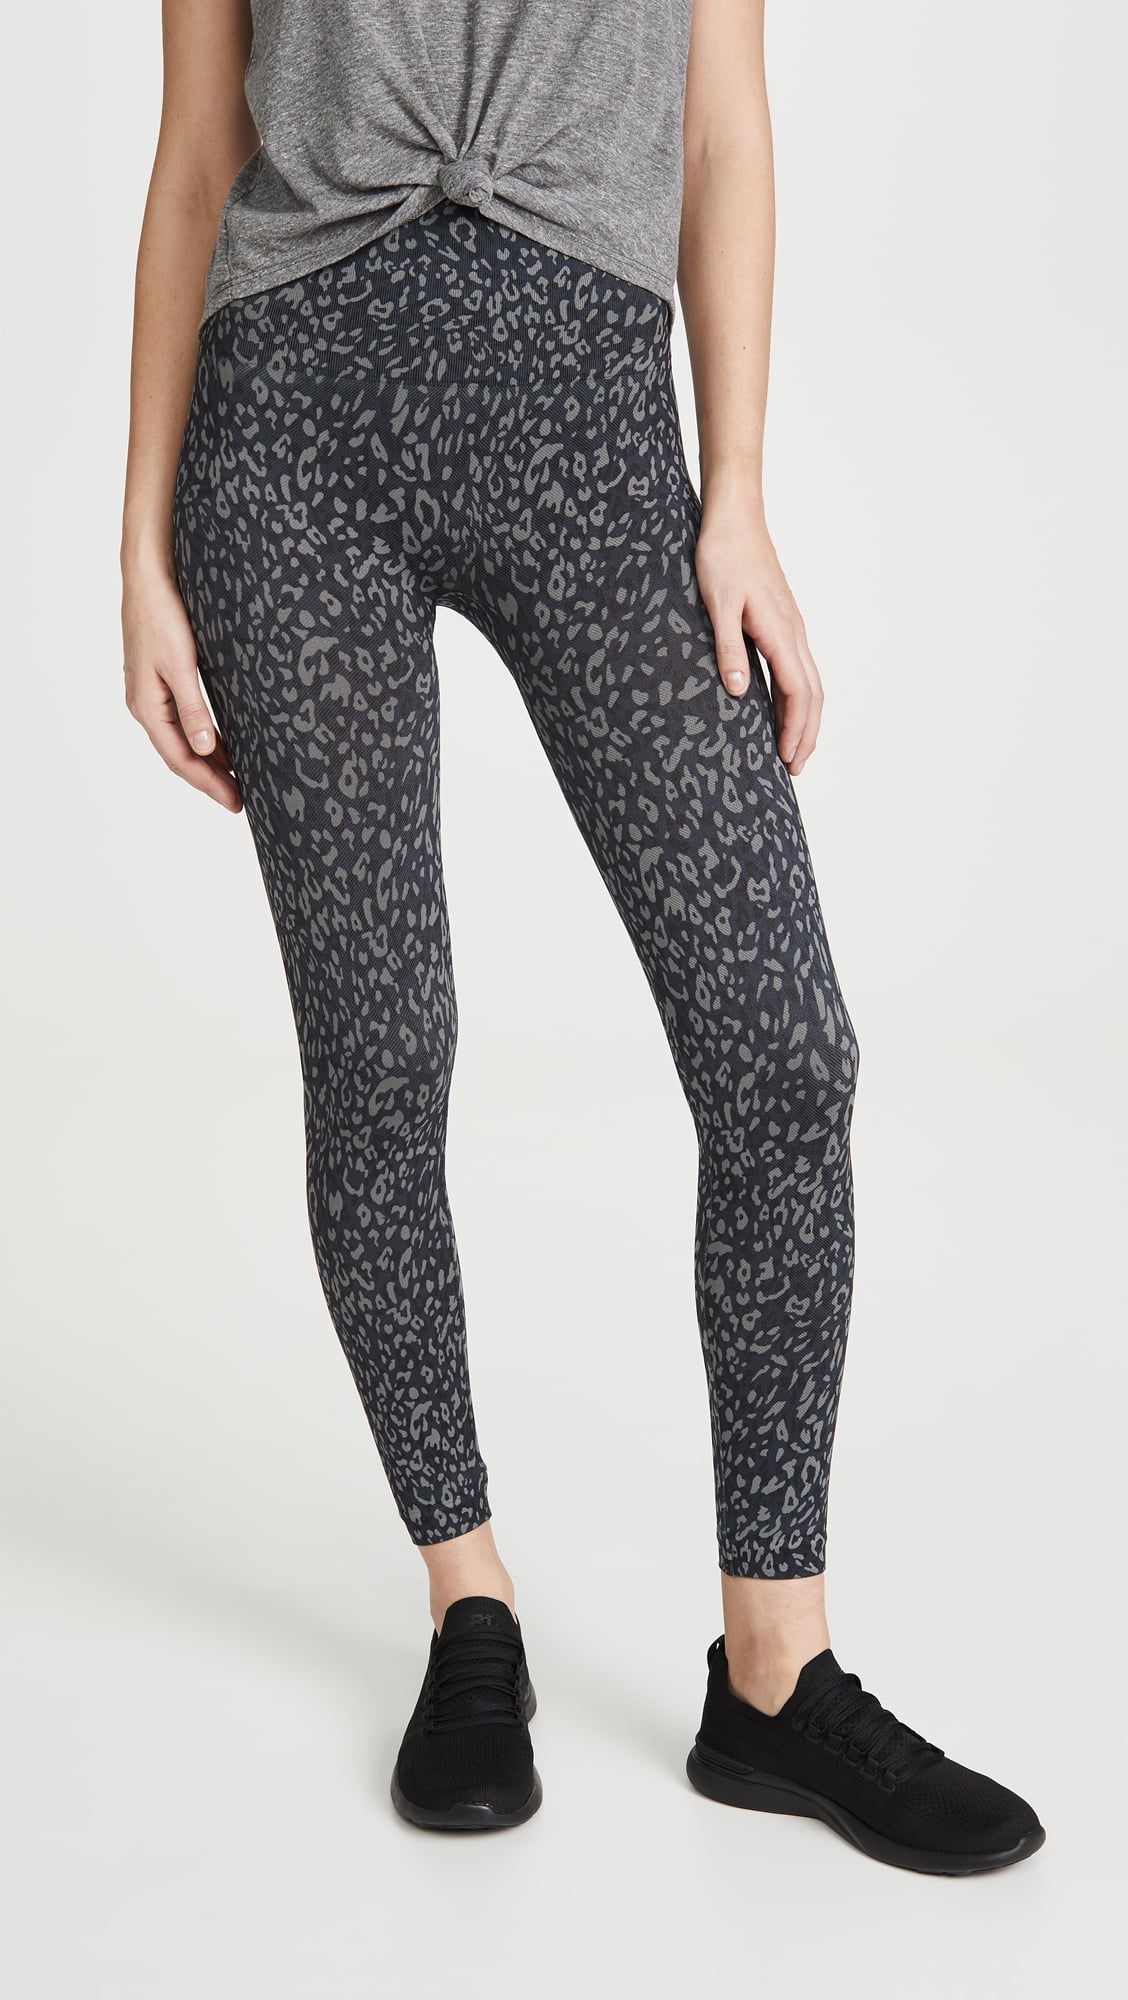 If You Own A Pet, These Are The Leggings You Need ASAP - Women's Health  Australia